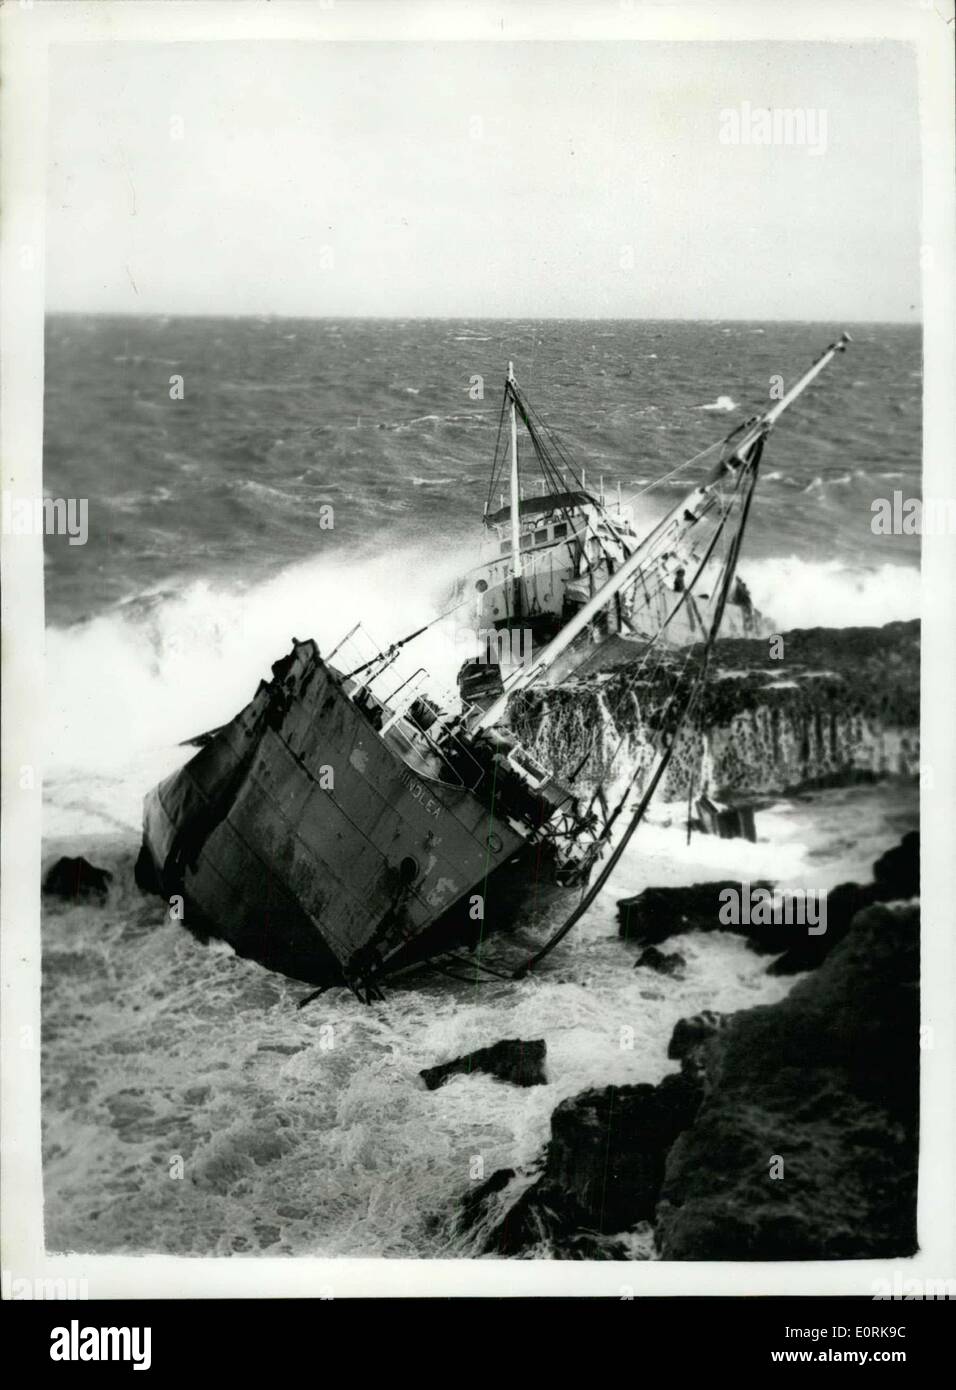 Oct. 29, 1959 - Death on the Rocks - The Camera Captures a Doomed Ship's Agony. This was the agony of the Hindlea, a ship murdered by the fury of the gale and the savage rocks on to which she was driven. She met her death on the rugged coast of Anglesey, at Moelfre. The 506tons Hindlea was one of hundreds of little ships pummelled by giant waves during Tuesday's gale. There were eight men aboard her when she began drifting towards the rocks. They owe their lives to the life boatmen of Moelfre, who made ten runs alongside the doomed ship before they got the crew off Stock Photo